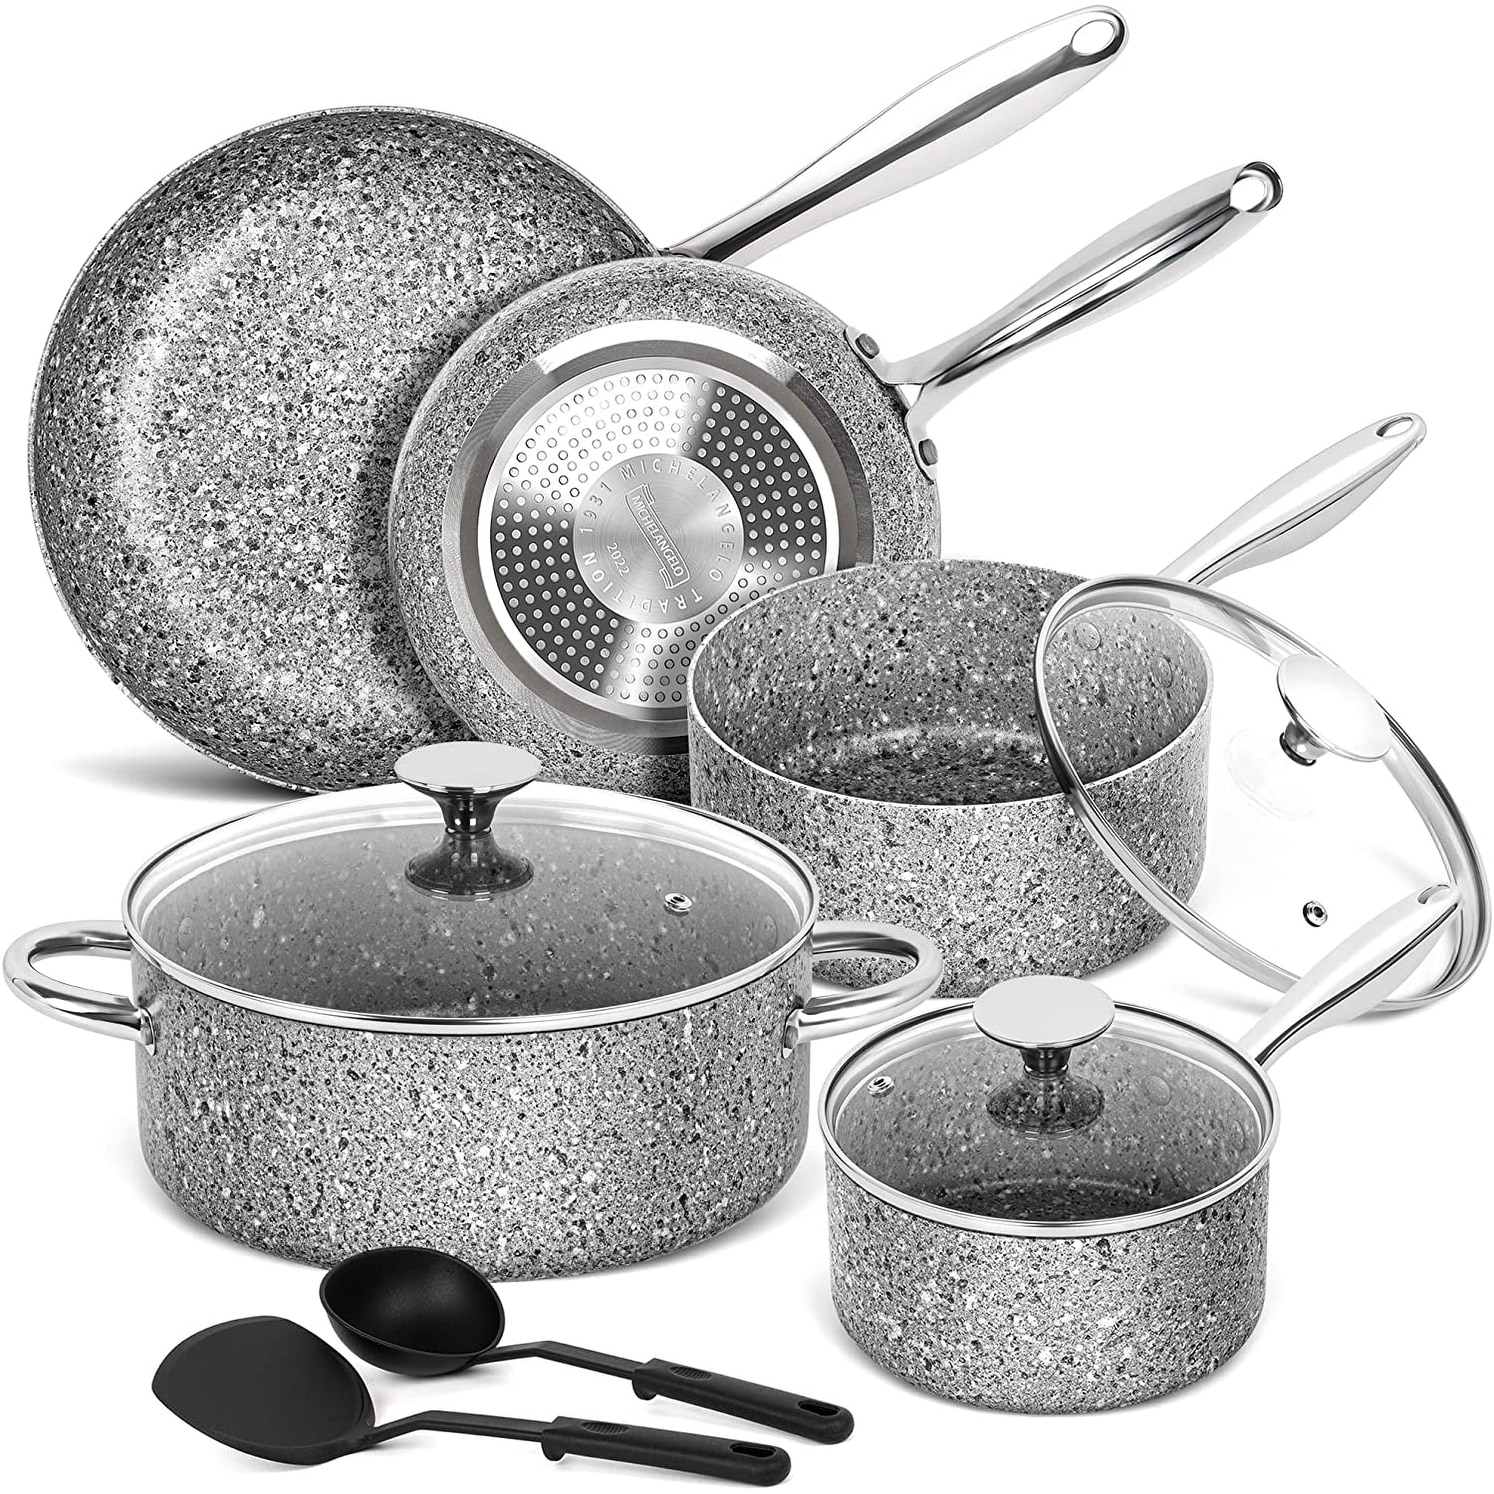 Pots and Pans Set 15 Piece, Nonstick Cookware Set with with Non- Toxic Stone-Derived Interior, Other